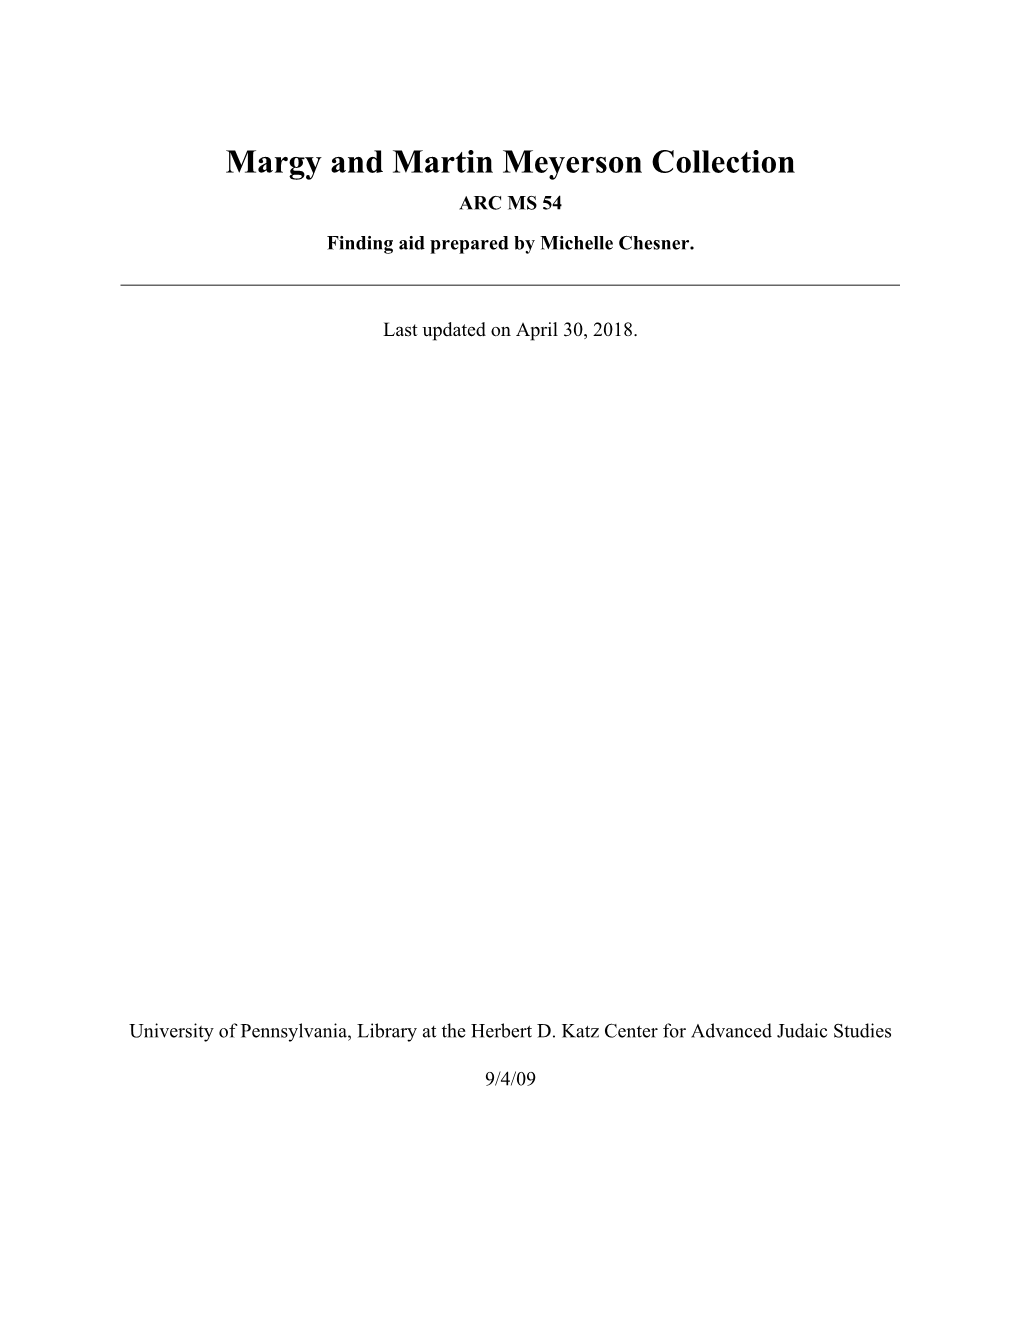 Margy and Martin Meyerson Collection ARC MS 54 Finding Aid Prepared by Michelle Chesner